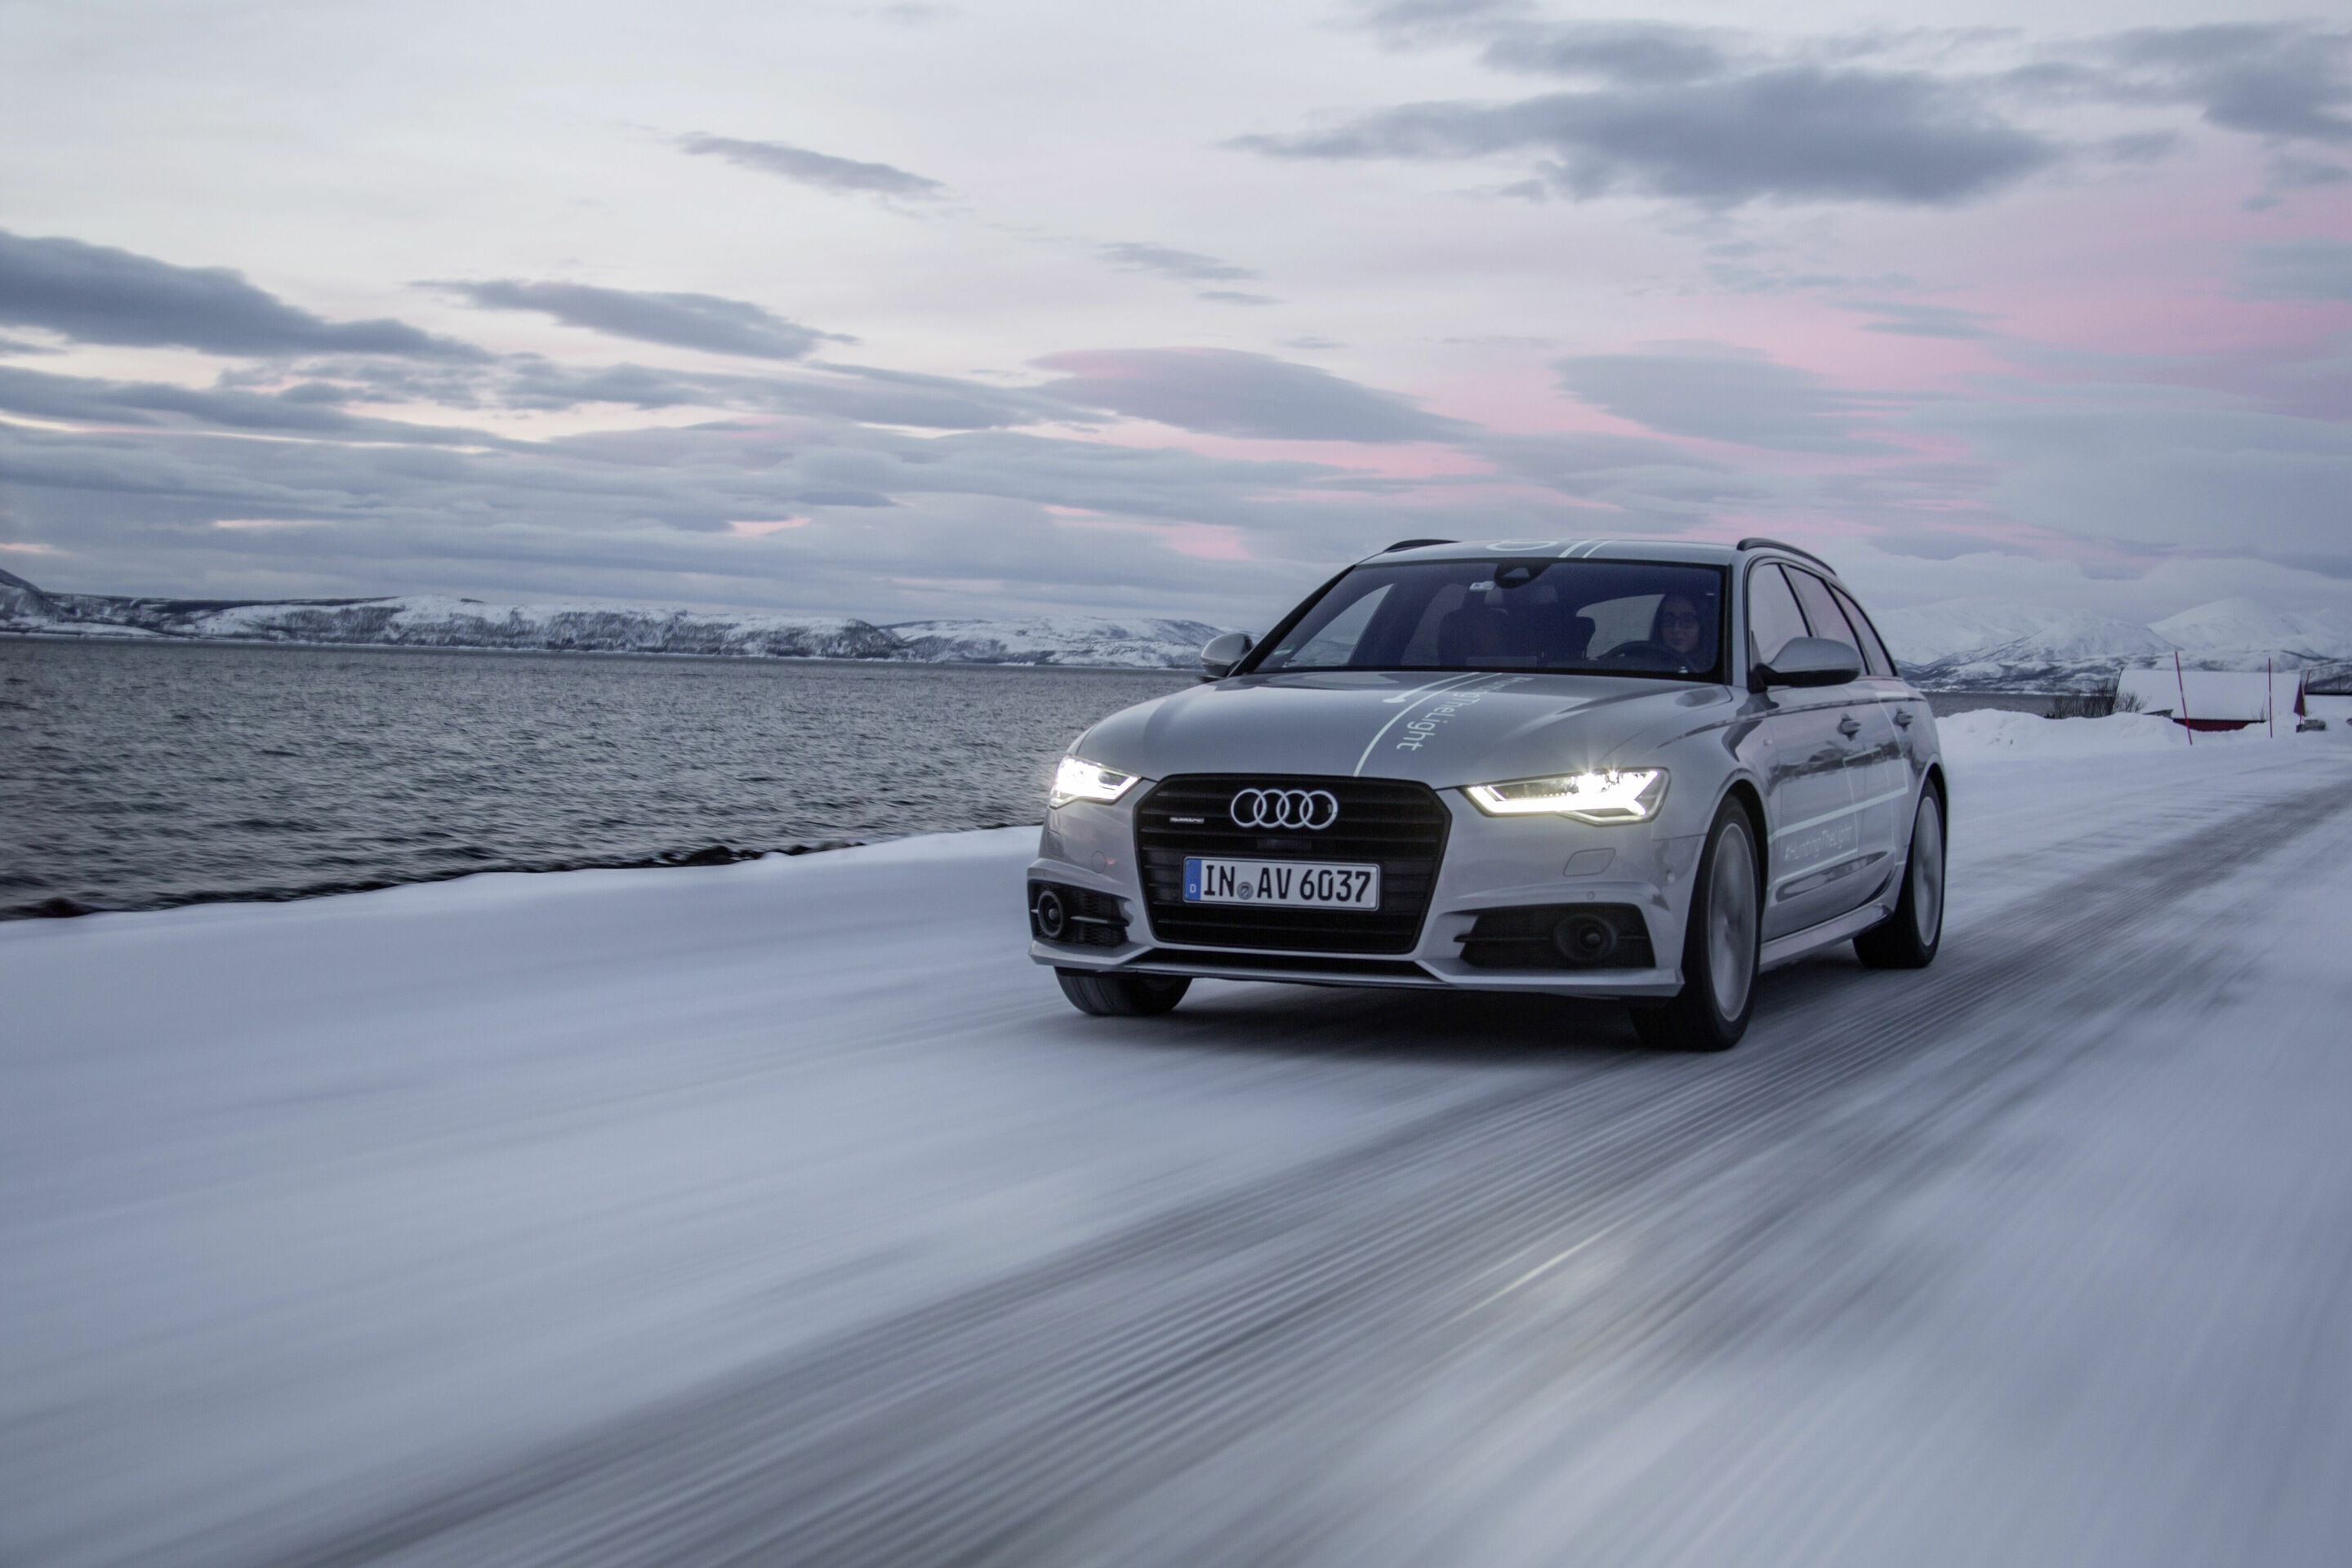 #HuntingTheLight with Matrix LED technology in the Audi A6 Avant in Northern Norway.